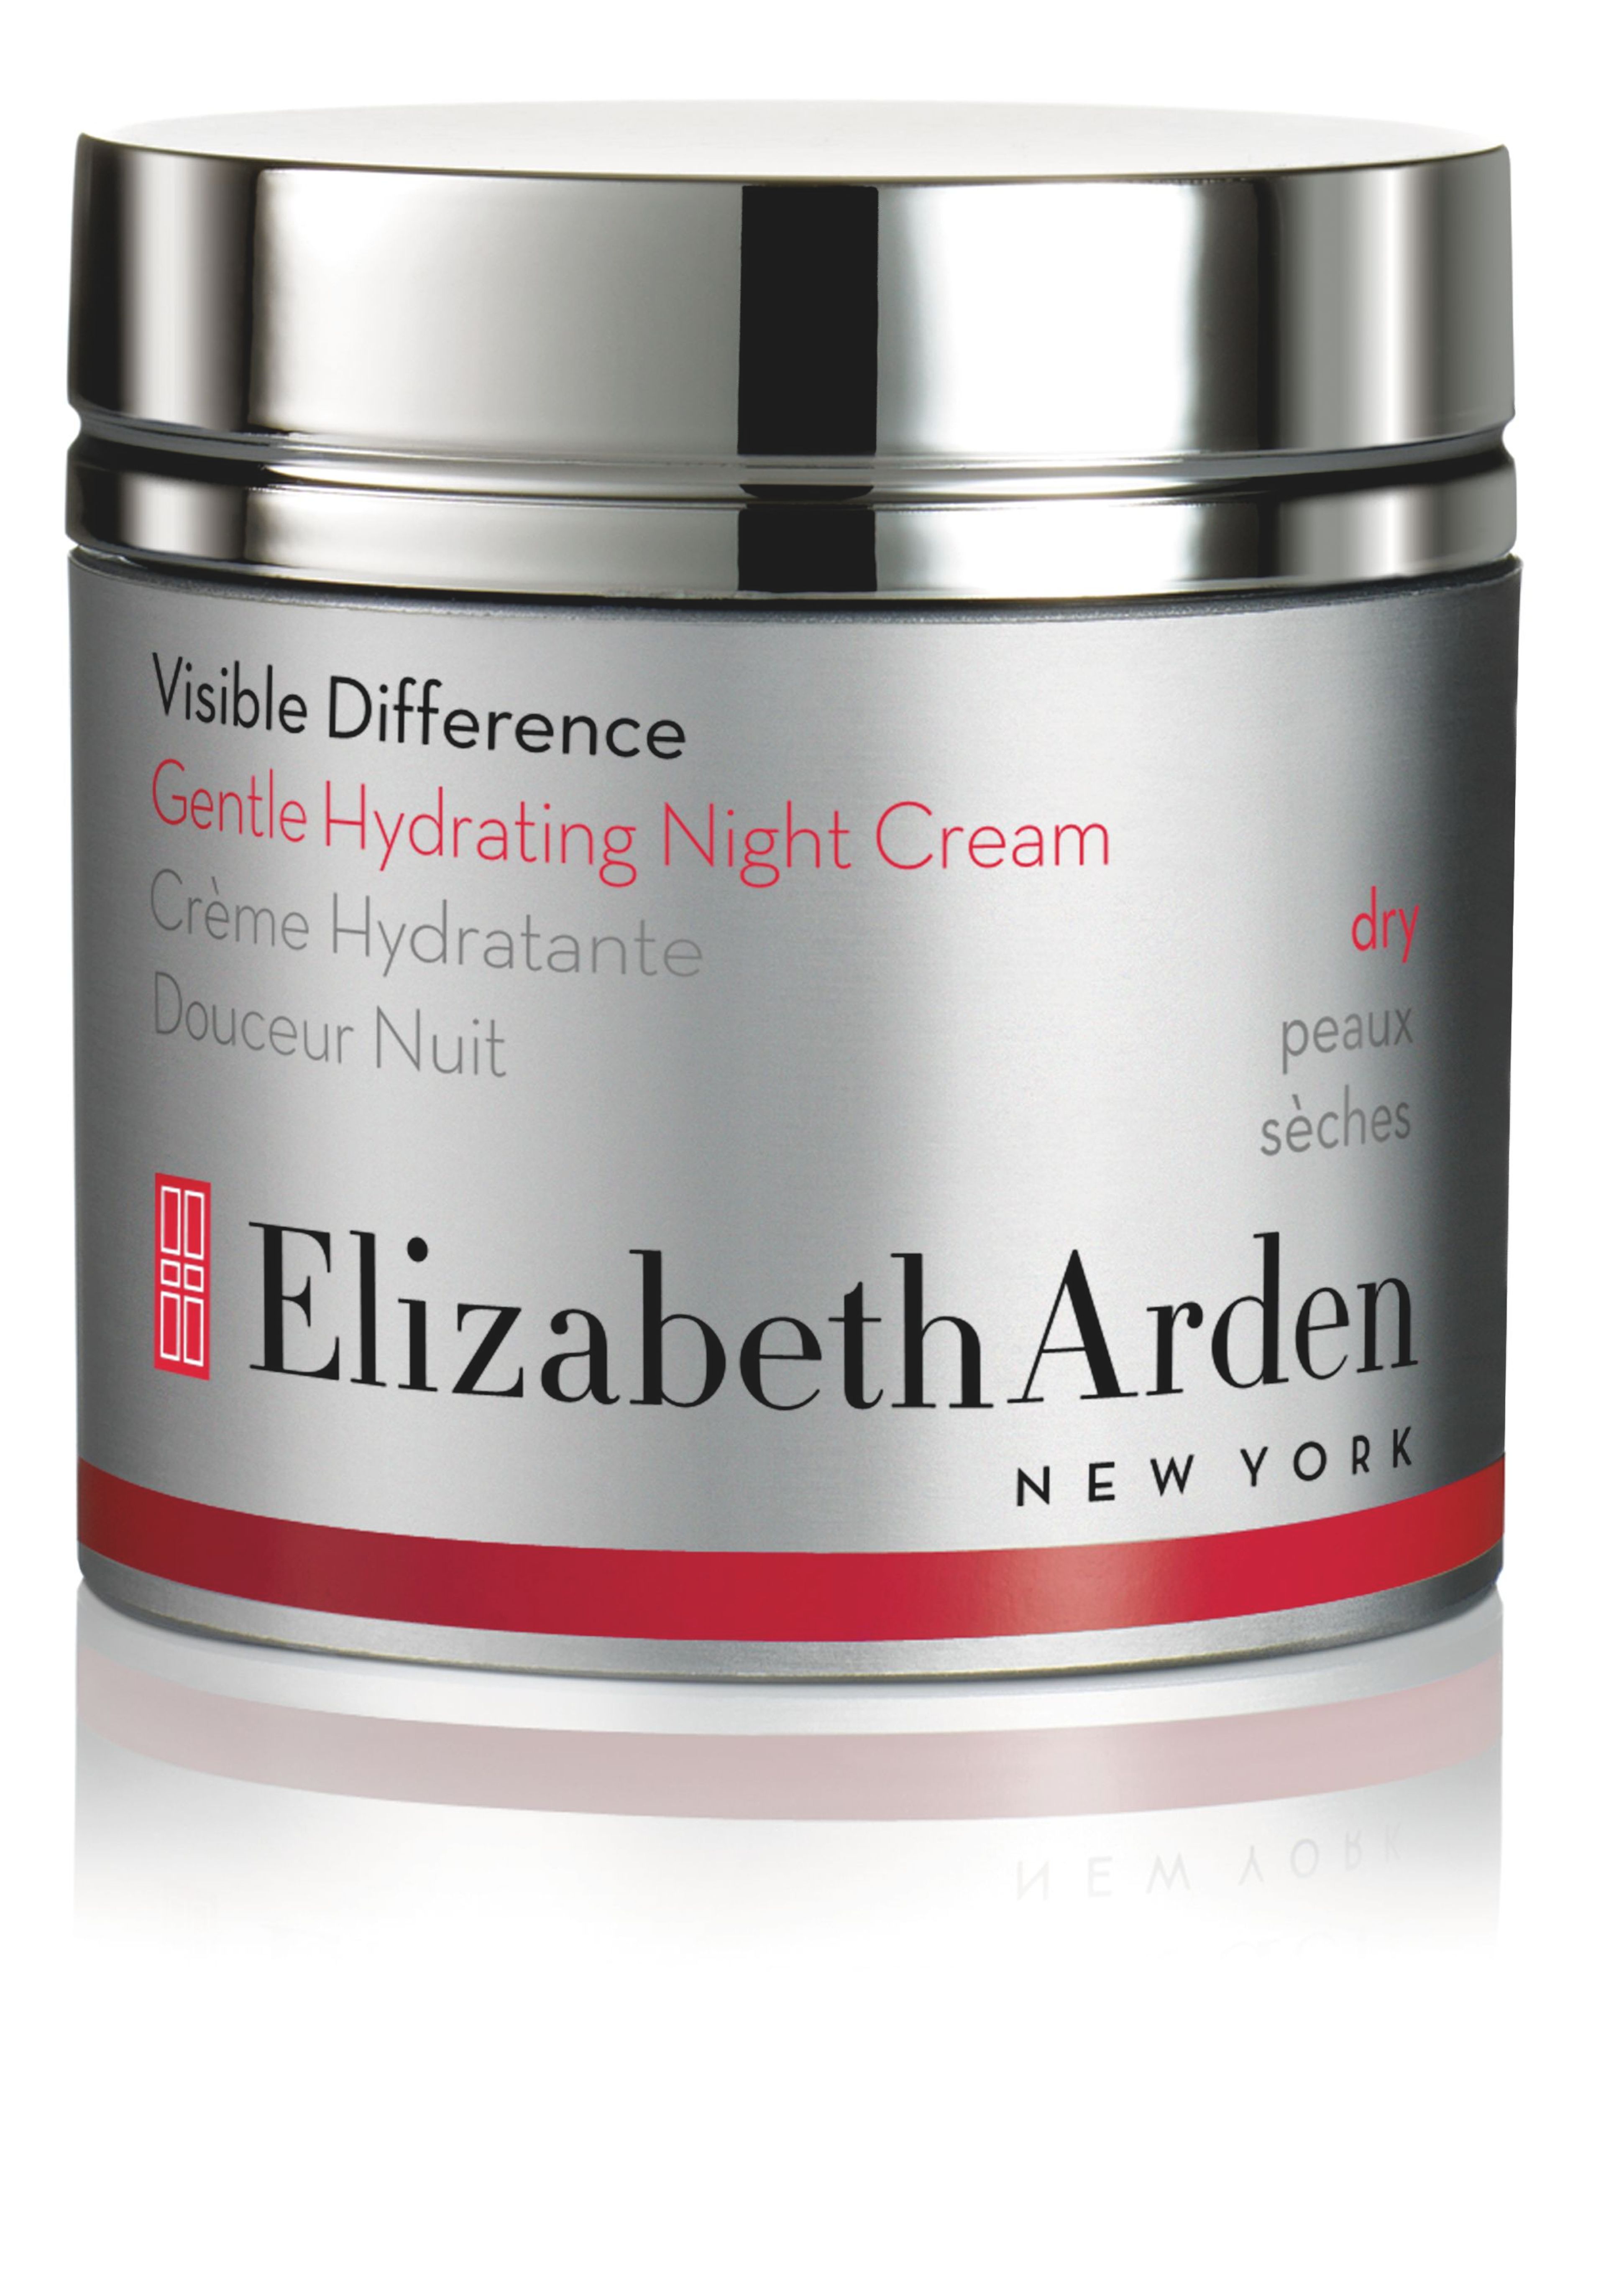 Elizabeth Arden Visible Difference Gentle Hydrating Night Cream 1